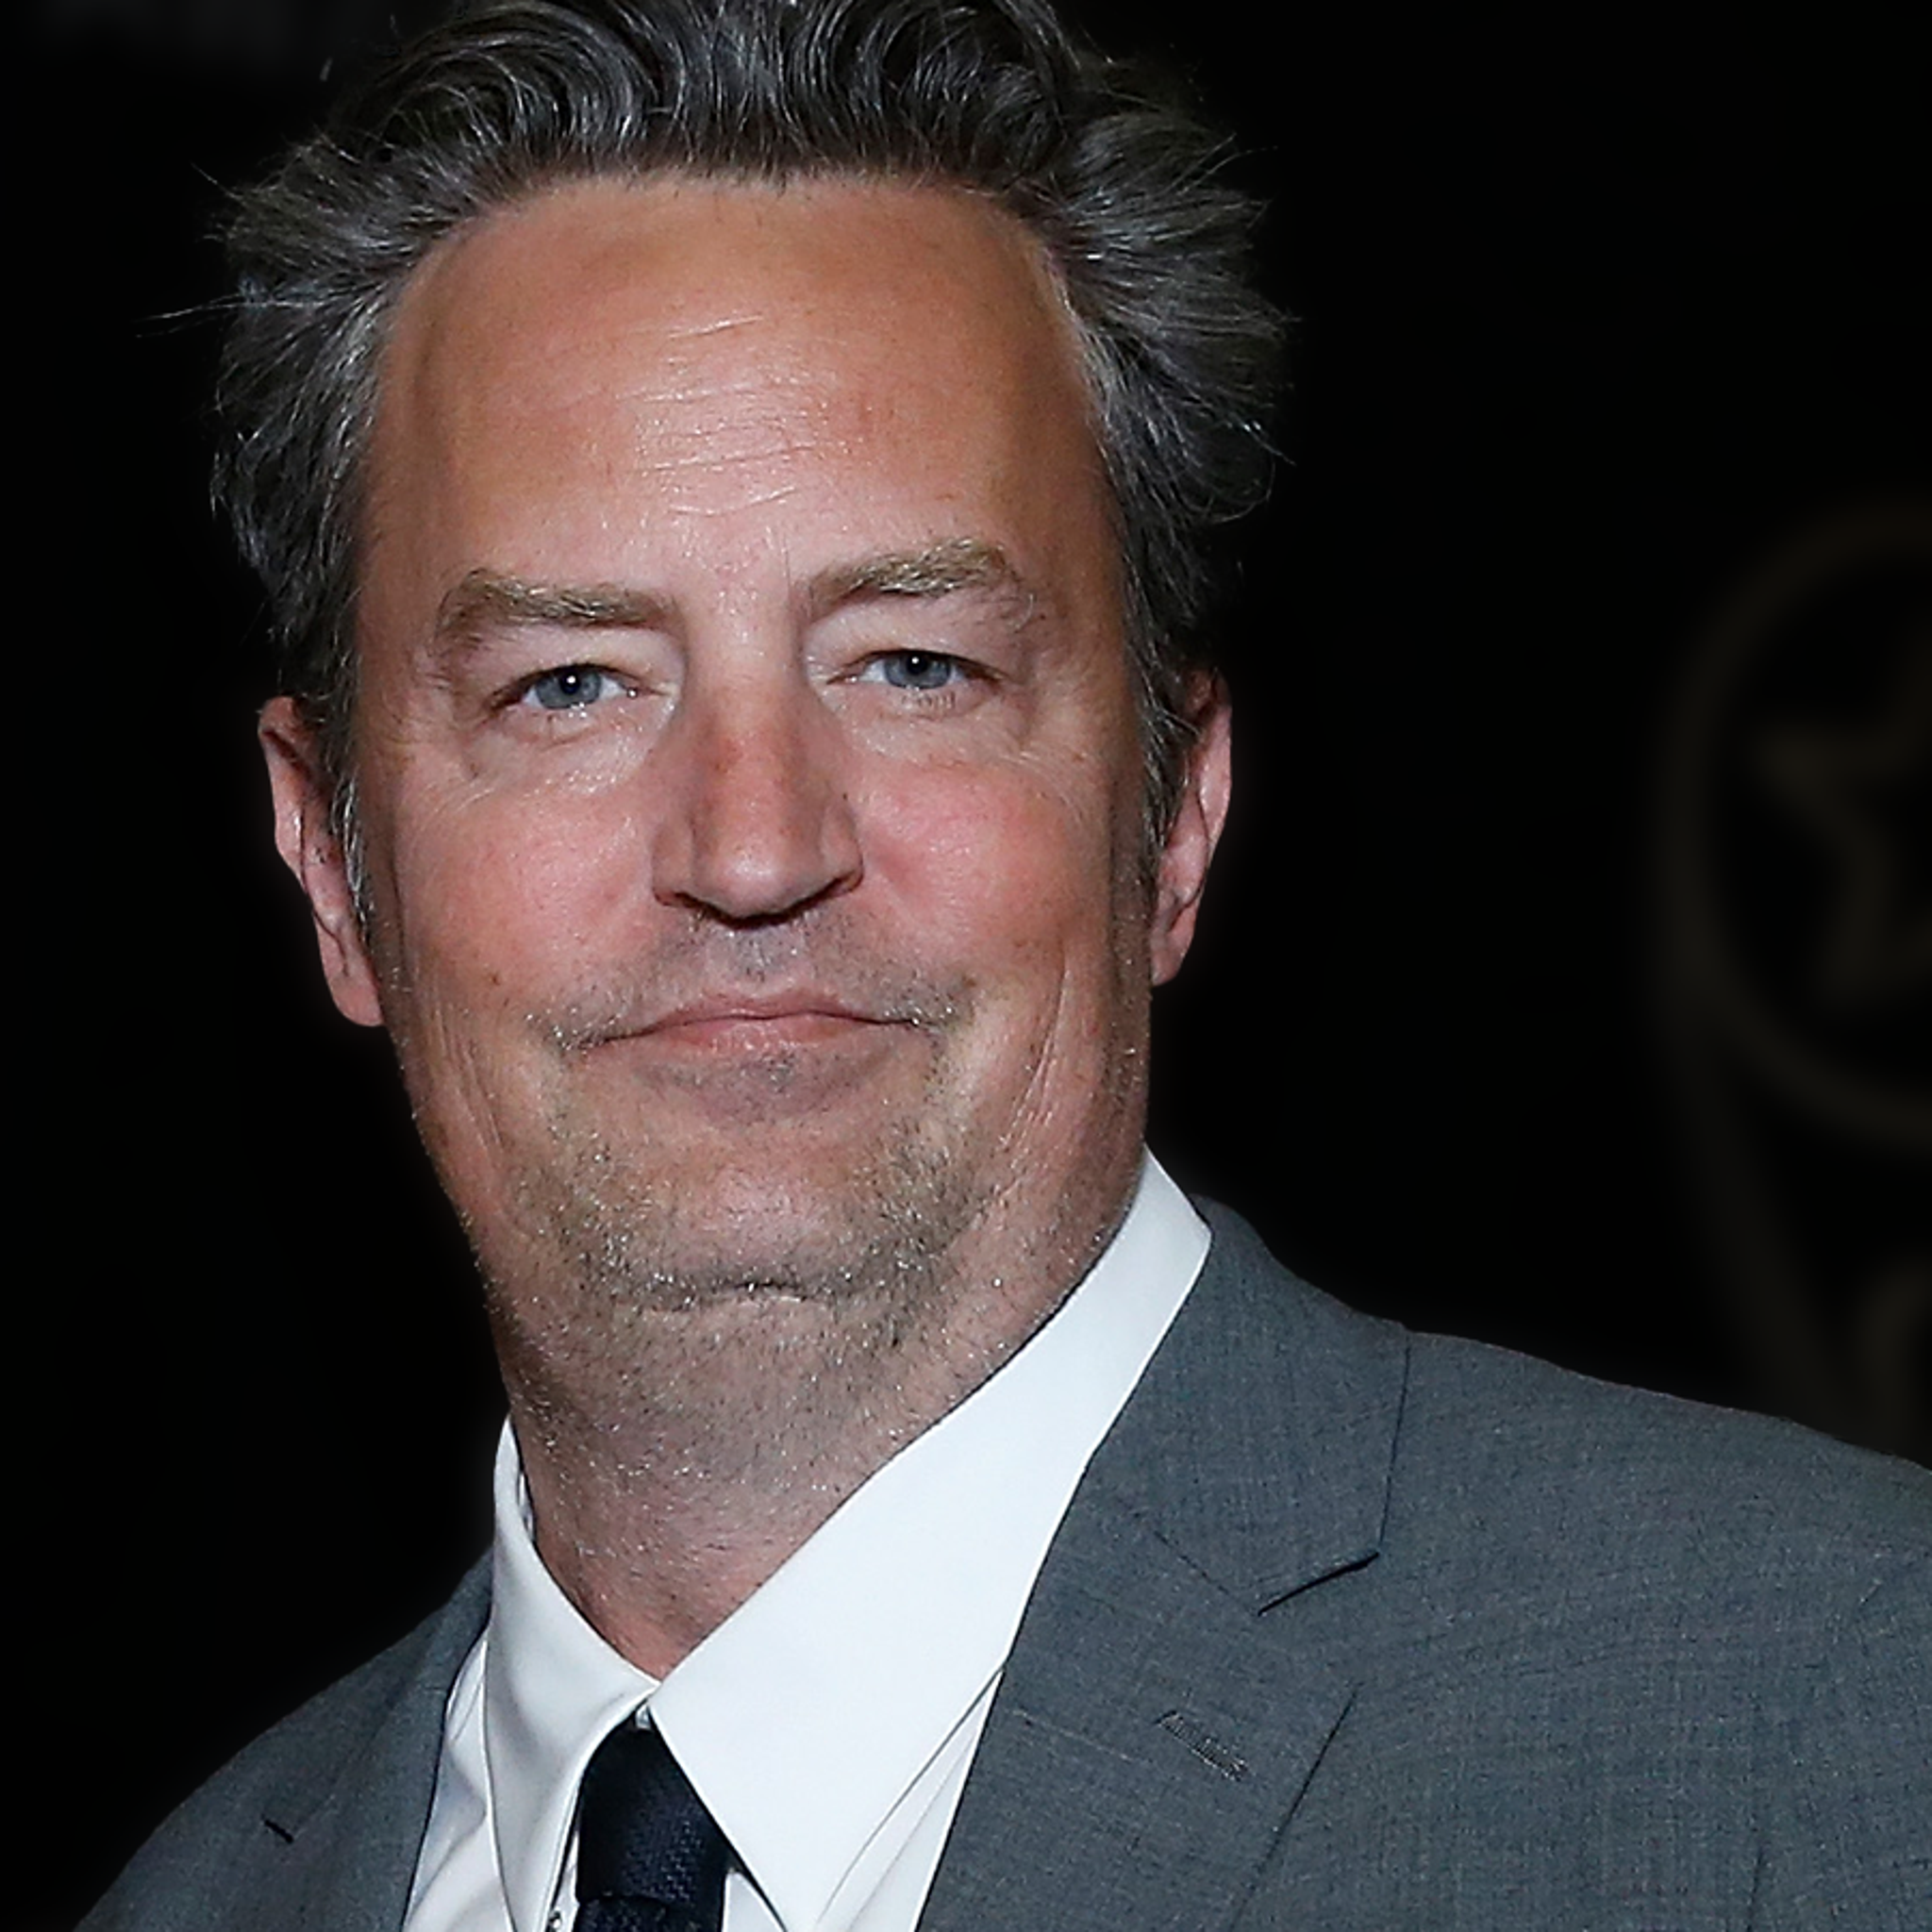 Ketamine in Matthew Perry's blood was at level of general anesthesia:  officials - Los Angeles Times